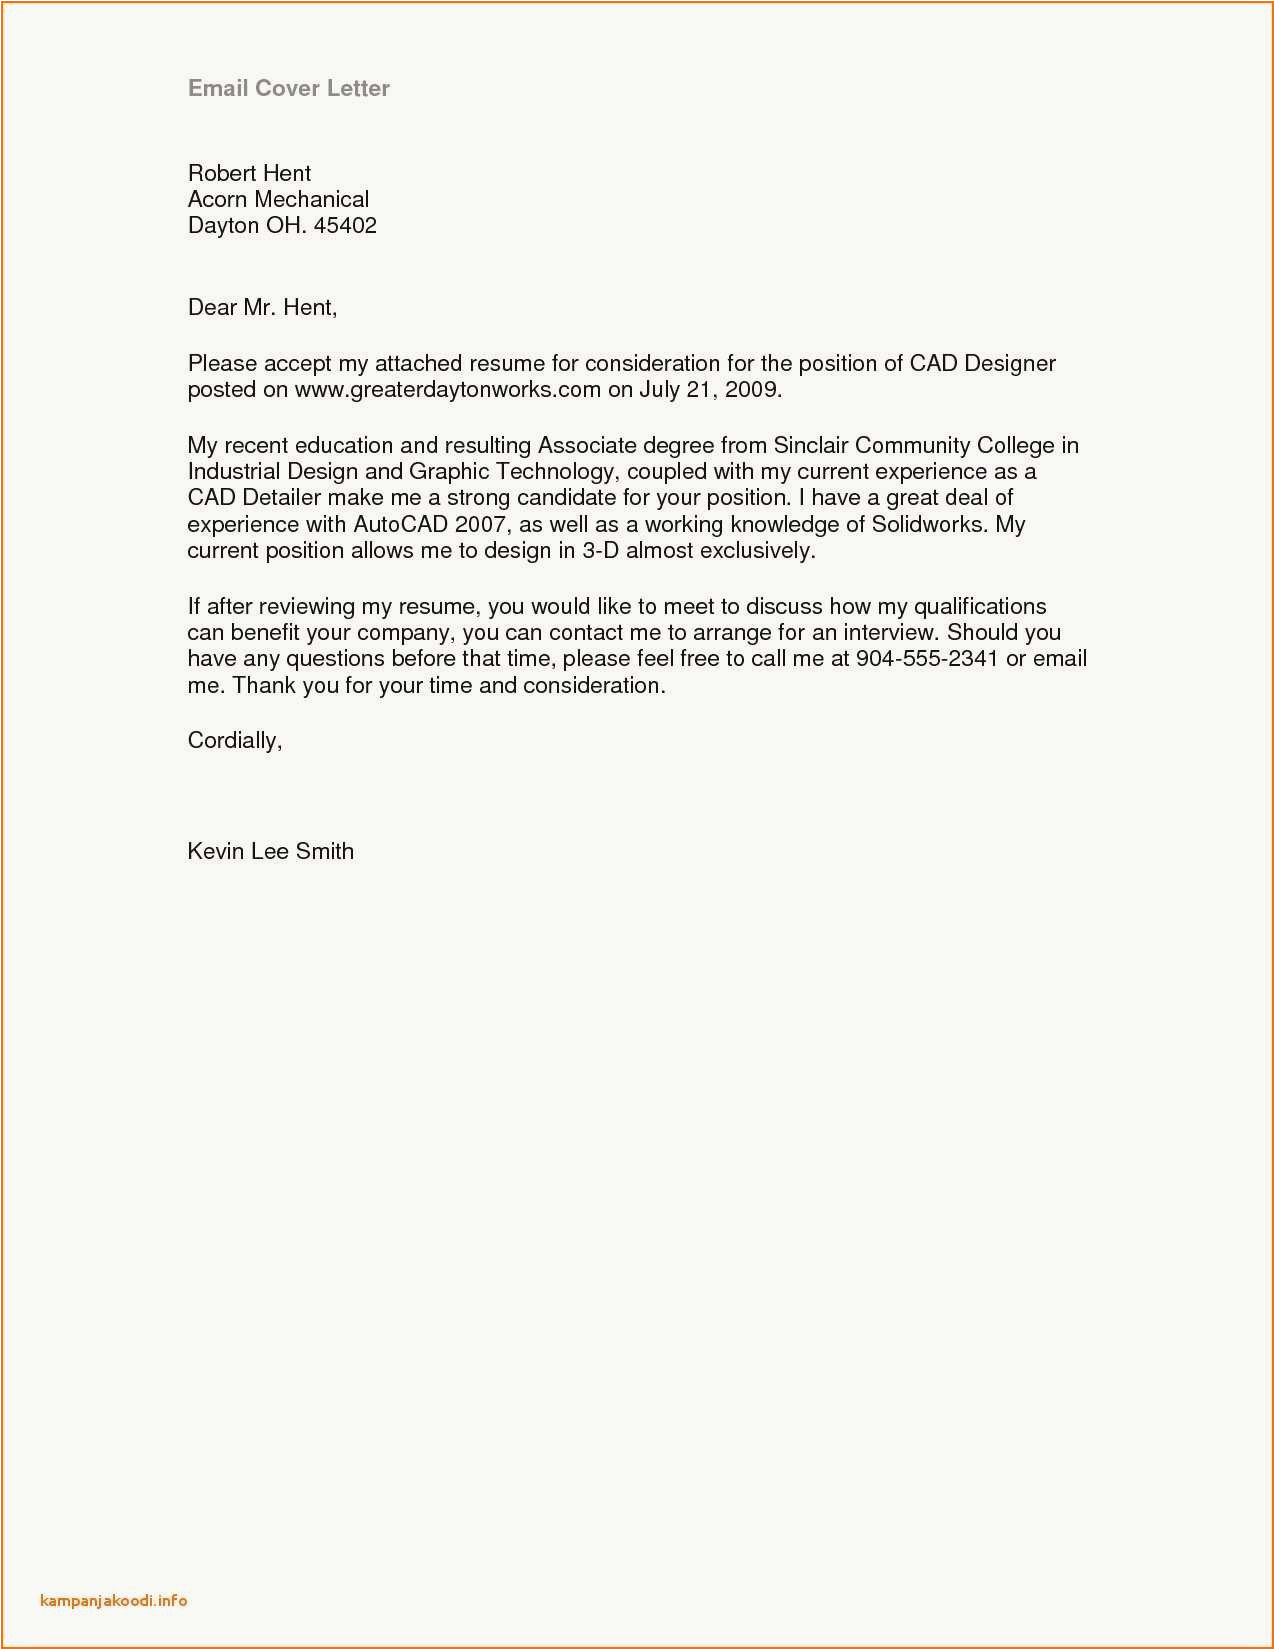 Sample Email Letter with Resume attached Download Best Job Application Cover Letter Template Free